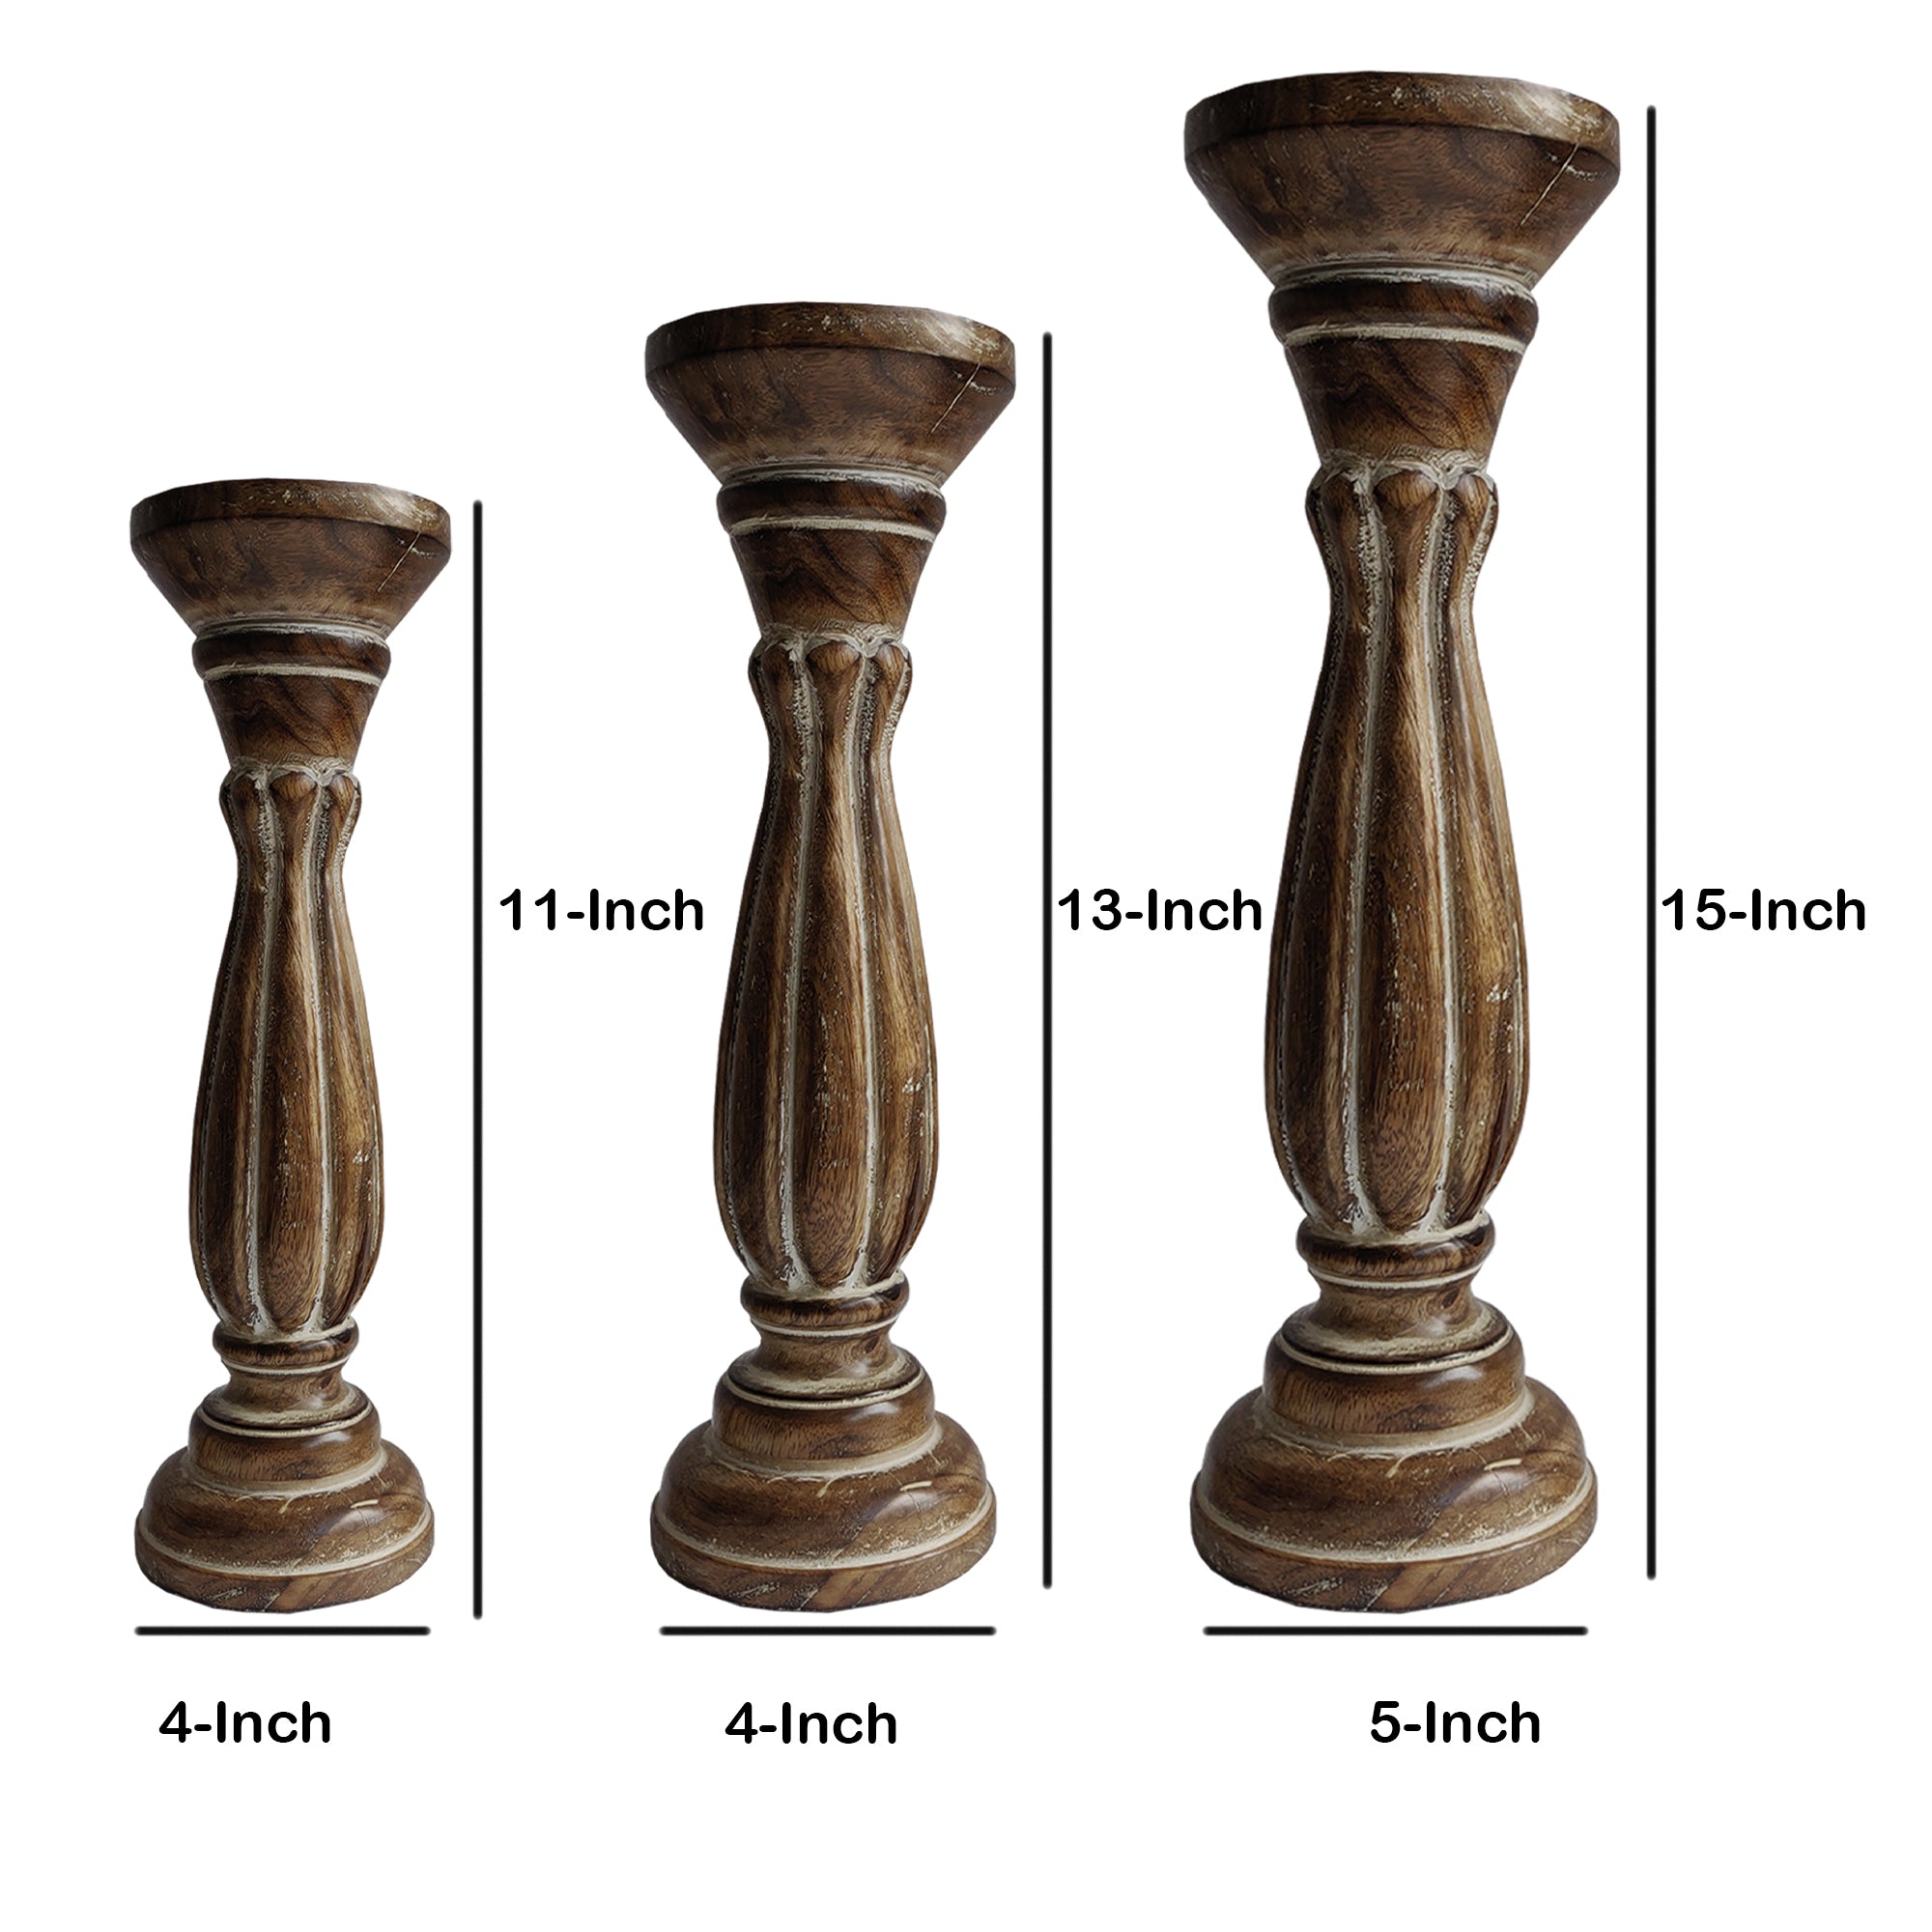 Handmade Wooden Candle Holder with Pillar Base Support (Set of 3) - Distressed Brown